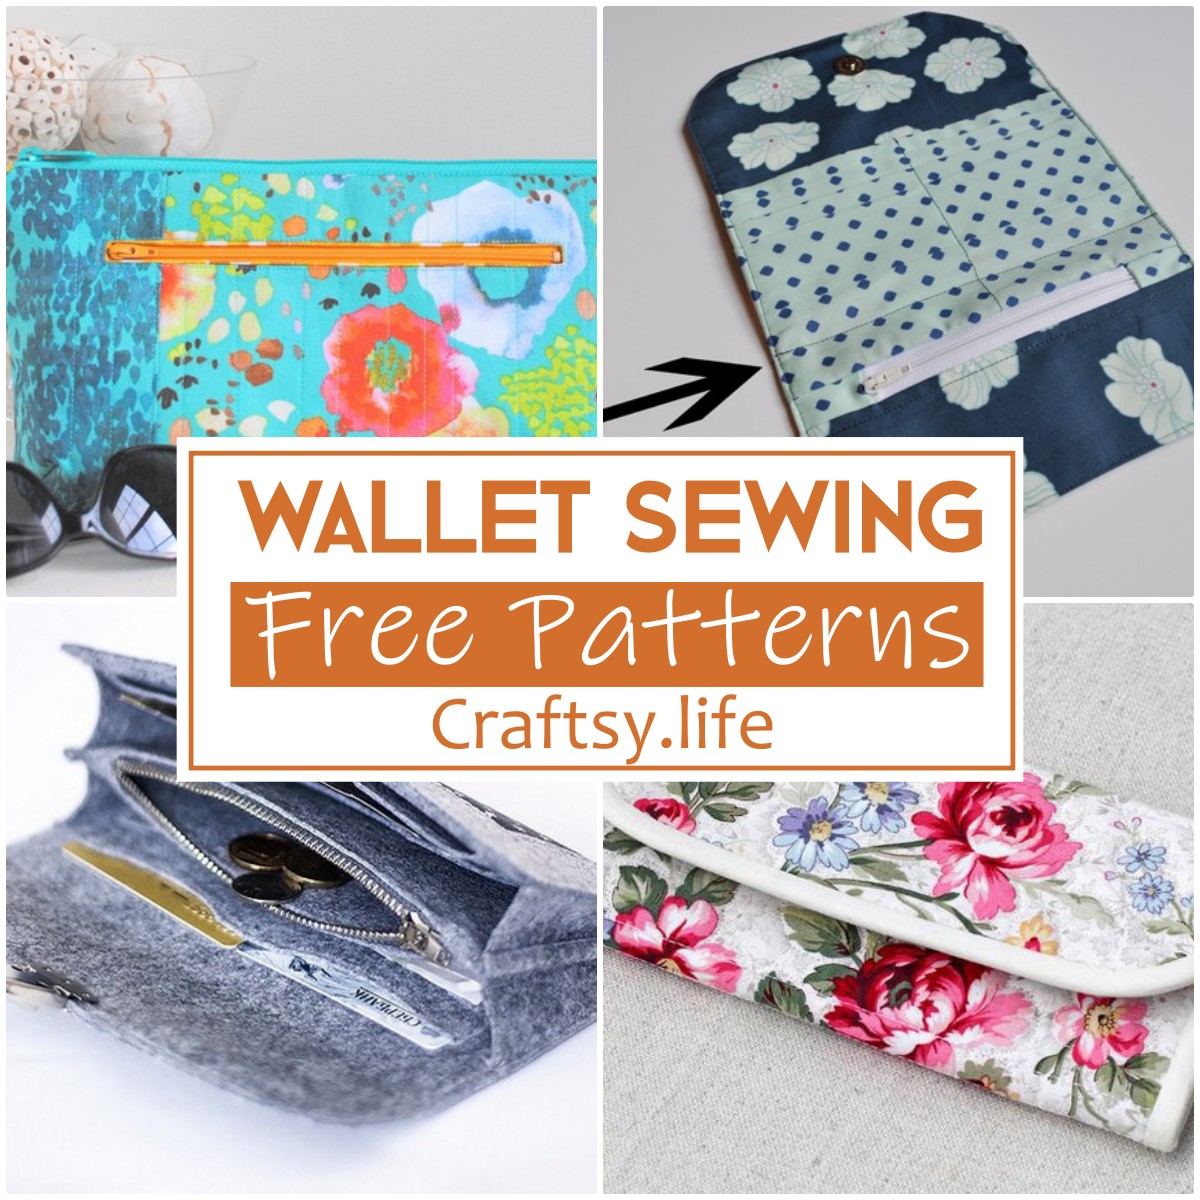 17 Free Wallet Sewing Patterns For All Ages - Craftsy